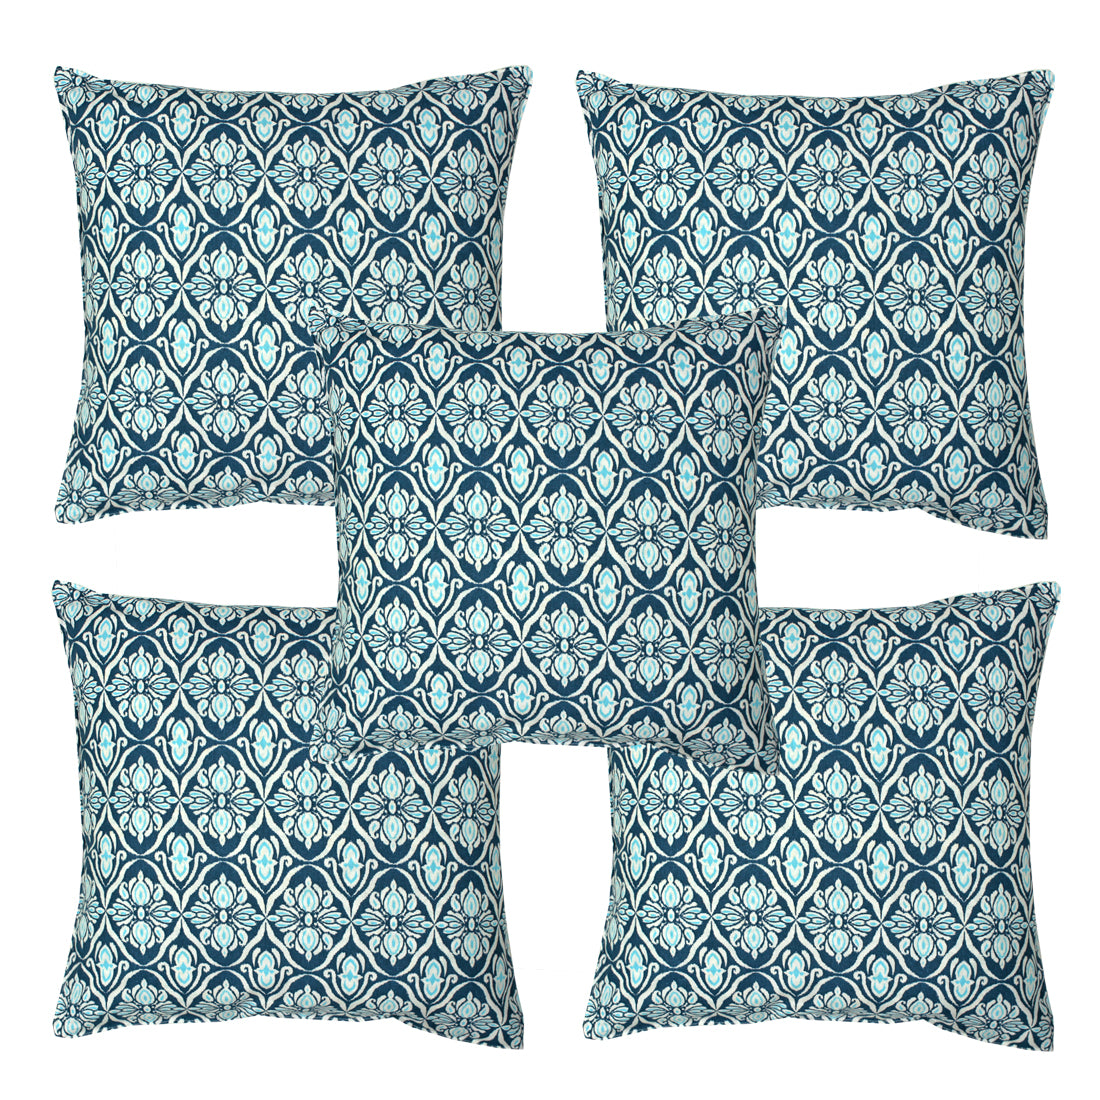 Soft Ikat print Navy Blue Cotton Cushion Cover Set online in India